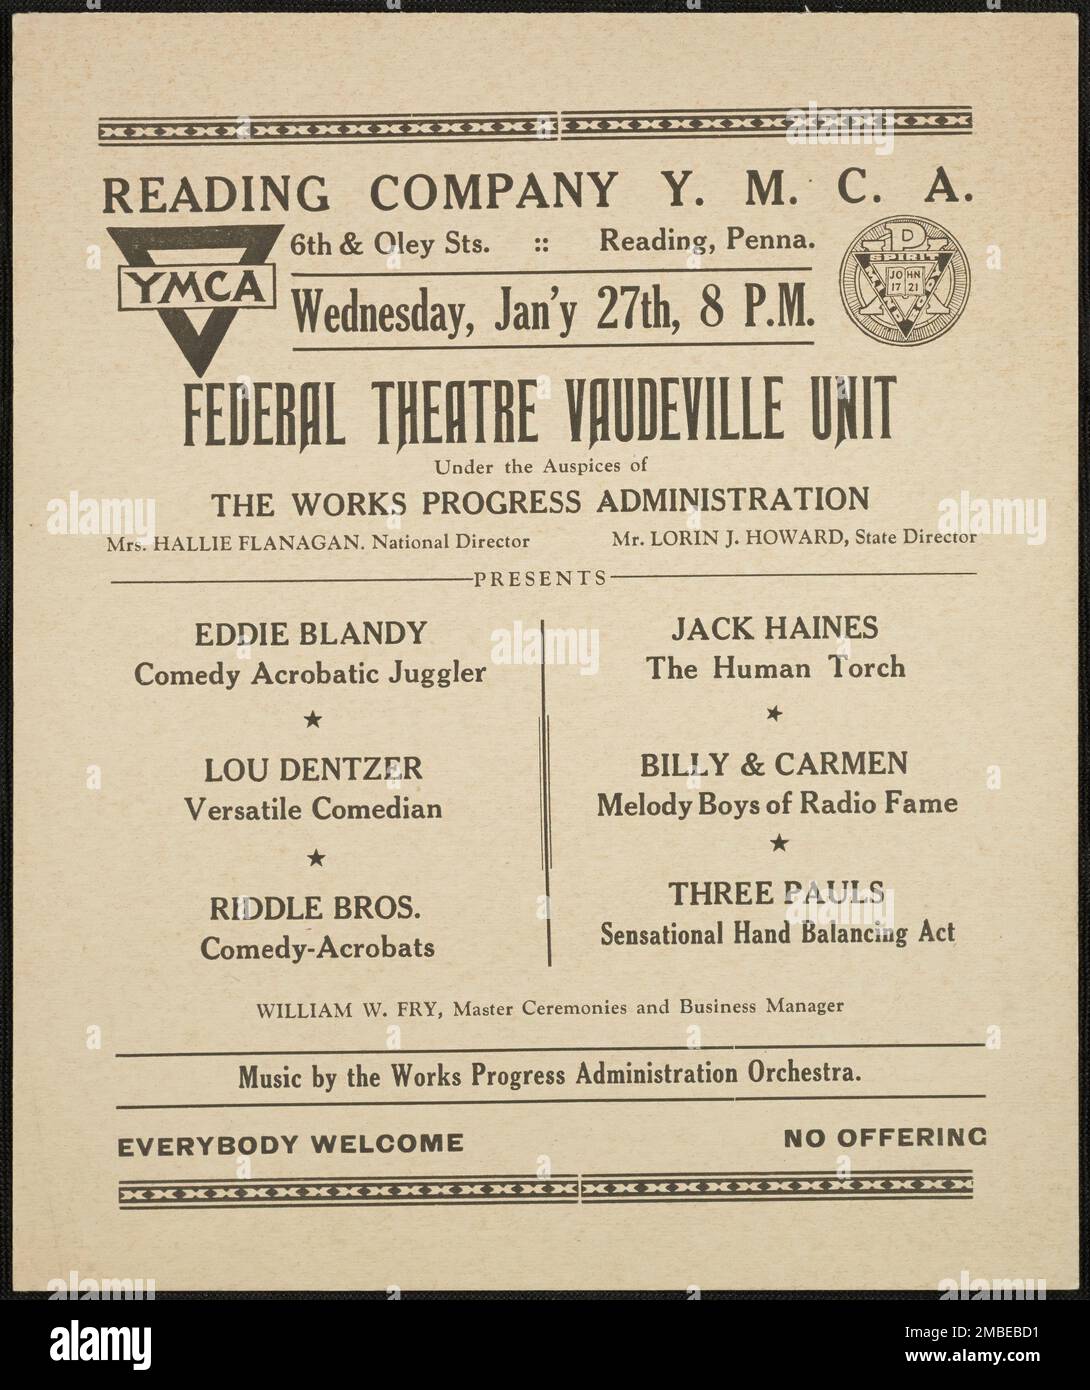 Vaudeville Unit, Reading, PA, [193-]. 'Reading Company Y.M.C.A...Federal Theatre Vaudeville Unit...Presents - Eddie Blandy - Comedy Acrobatic Juggler; Lou Dentzer - Versatile Comedian; Riddle Bros. - Comedy-Acrobats; Jack Haines - The Human Torch; Billy &amp; Carmen - Melody Boys of Radio Fame; Three Pauls - Sensational Hand Balancing Act - William W. Fry, Master Ceremonies and Business Manager'. The Federal Theatre Project, created by the U.S. Works Progress Administration in 1935, was designed to conserve and develop the skills of theater workers, re-employ them on public relief, and to brin Stock Photo